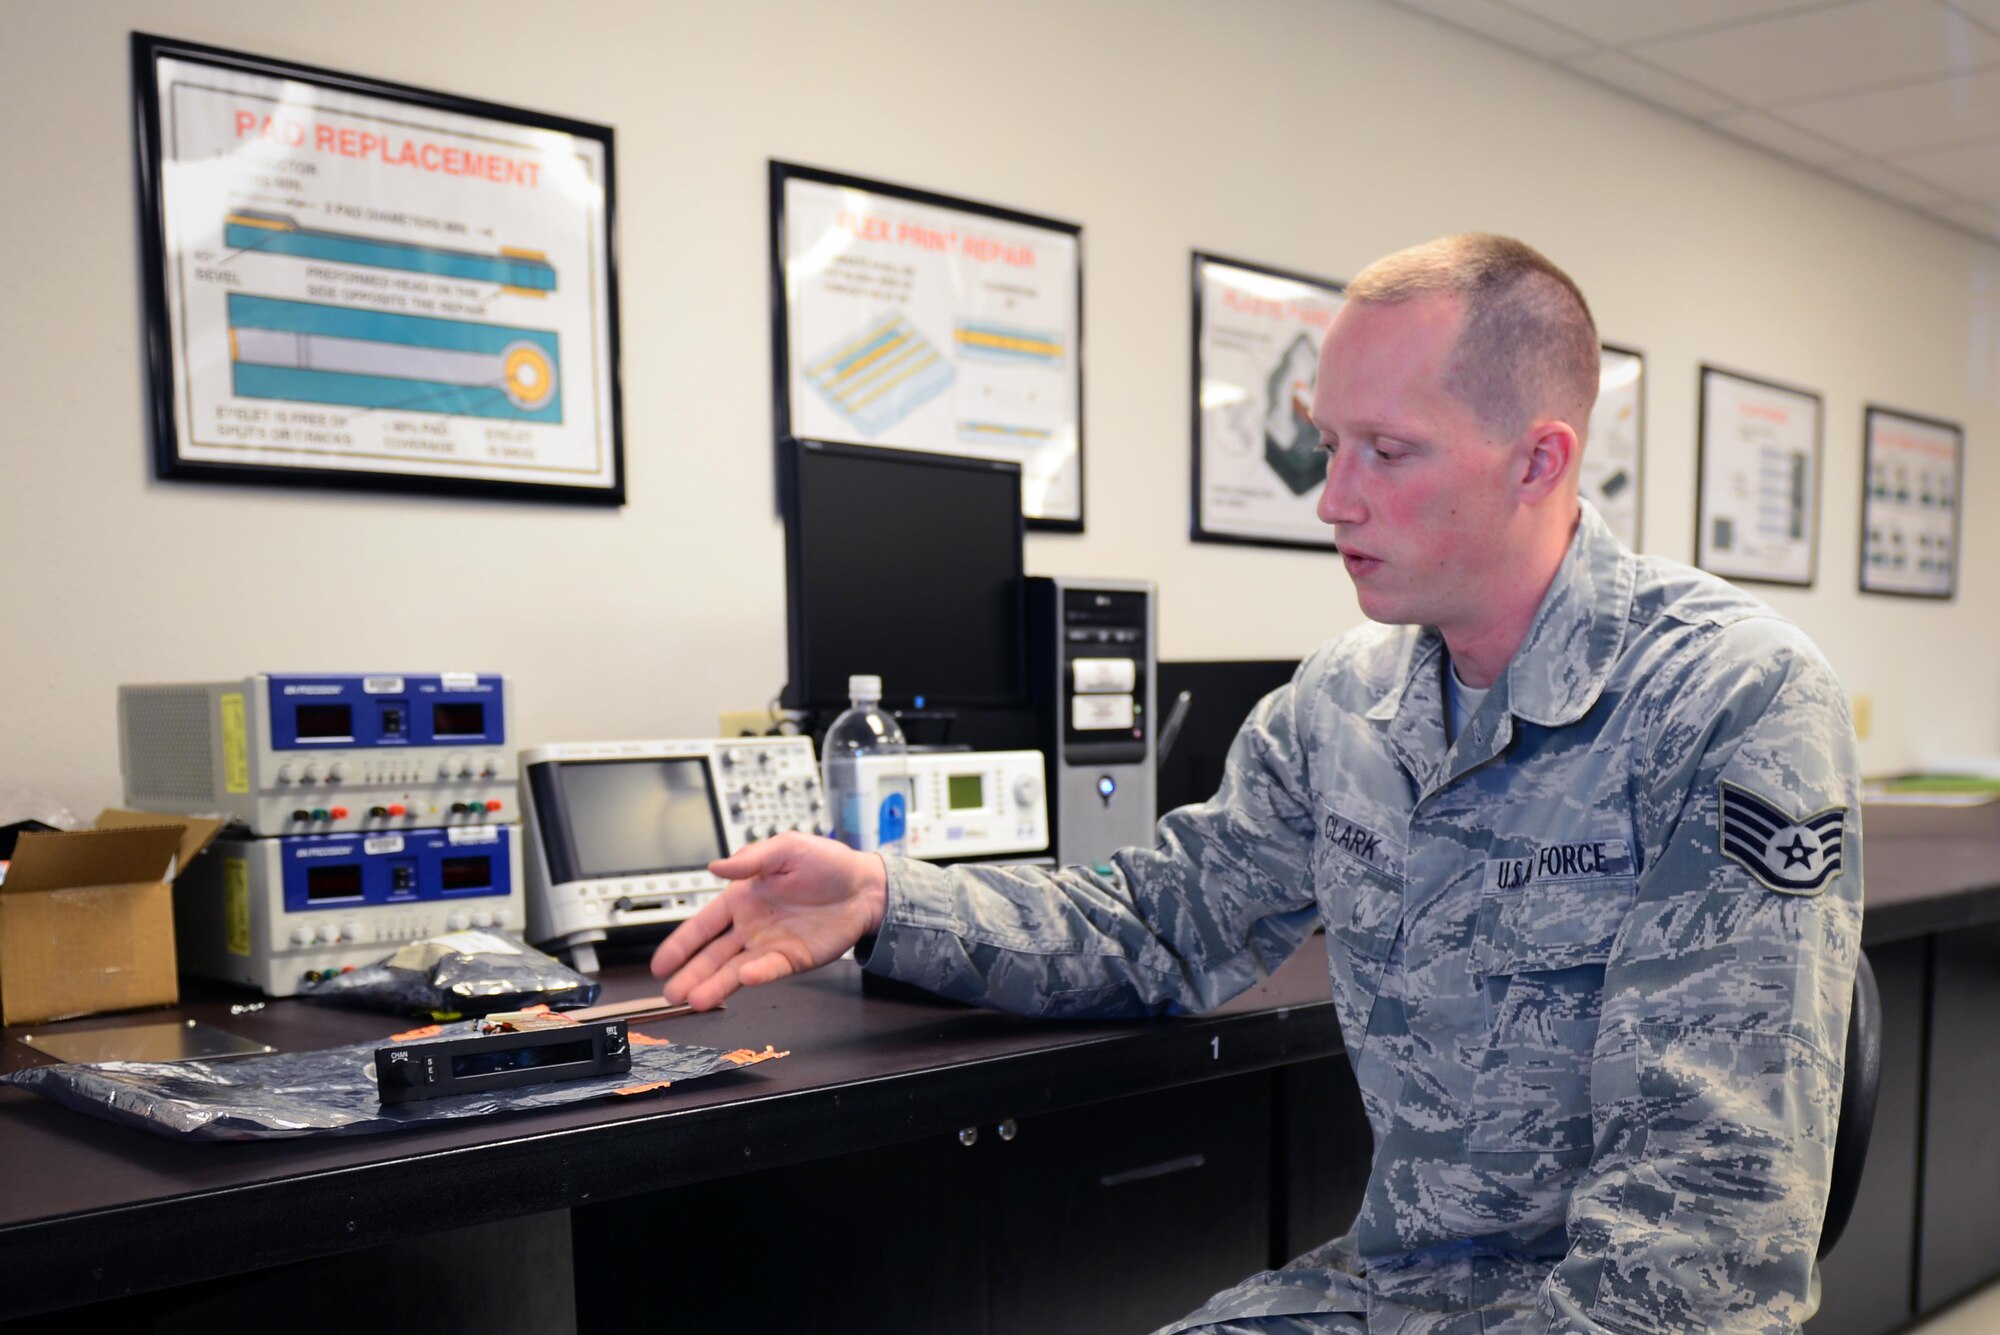 U.S. Air Force Staff Sgt. Paul Clark, 27th Special Operations Maintenance Group Air Force Repair Enhancement Program technician, reviews his process for repairing an LCD screen May 5, 2015 at Cannon Air Force Base, N.M. Clark trained in miniature and microminiature electronic repair, module test and repair, and electronic signal analysis courses before becoming a certified AFREP technician. (U.S. Air Force photo/Airman 1st Class Shelby Kay-Fantozzi)